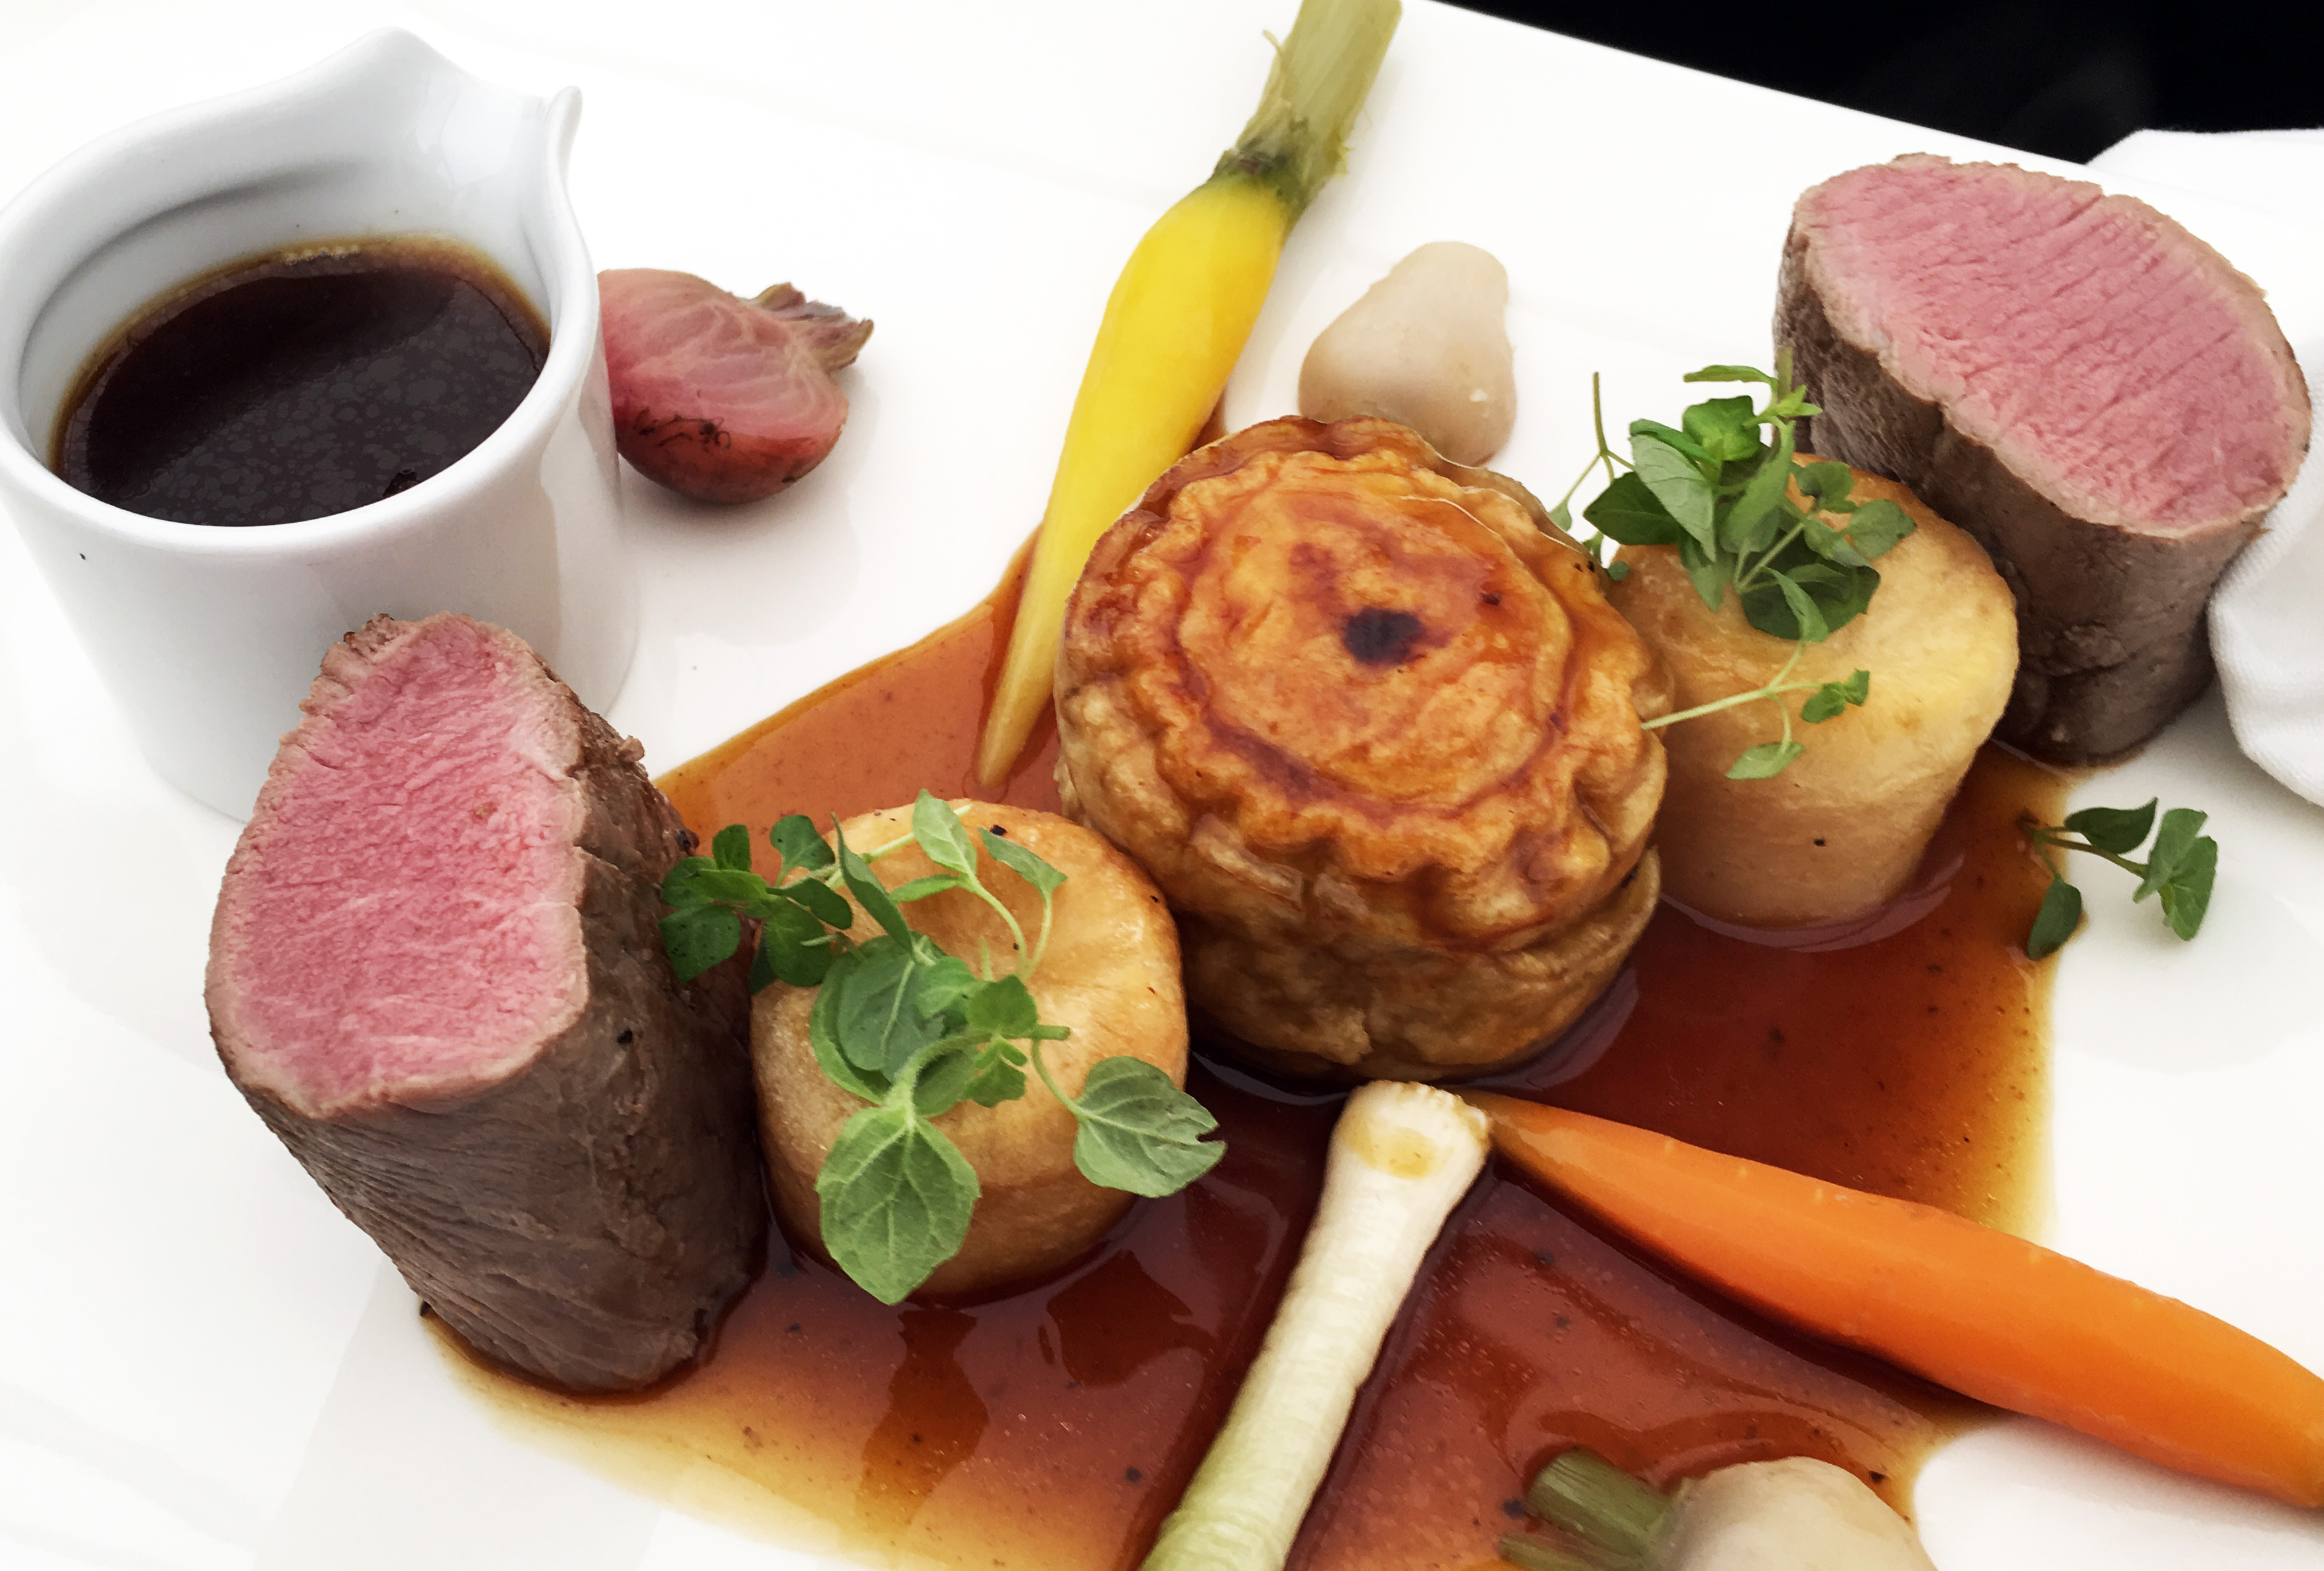 Nidderdale Lamb main course - by award winning caterers Dine